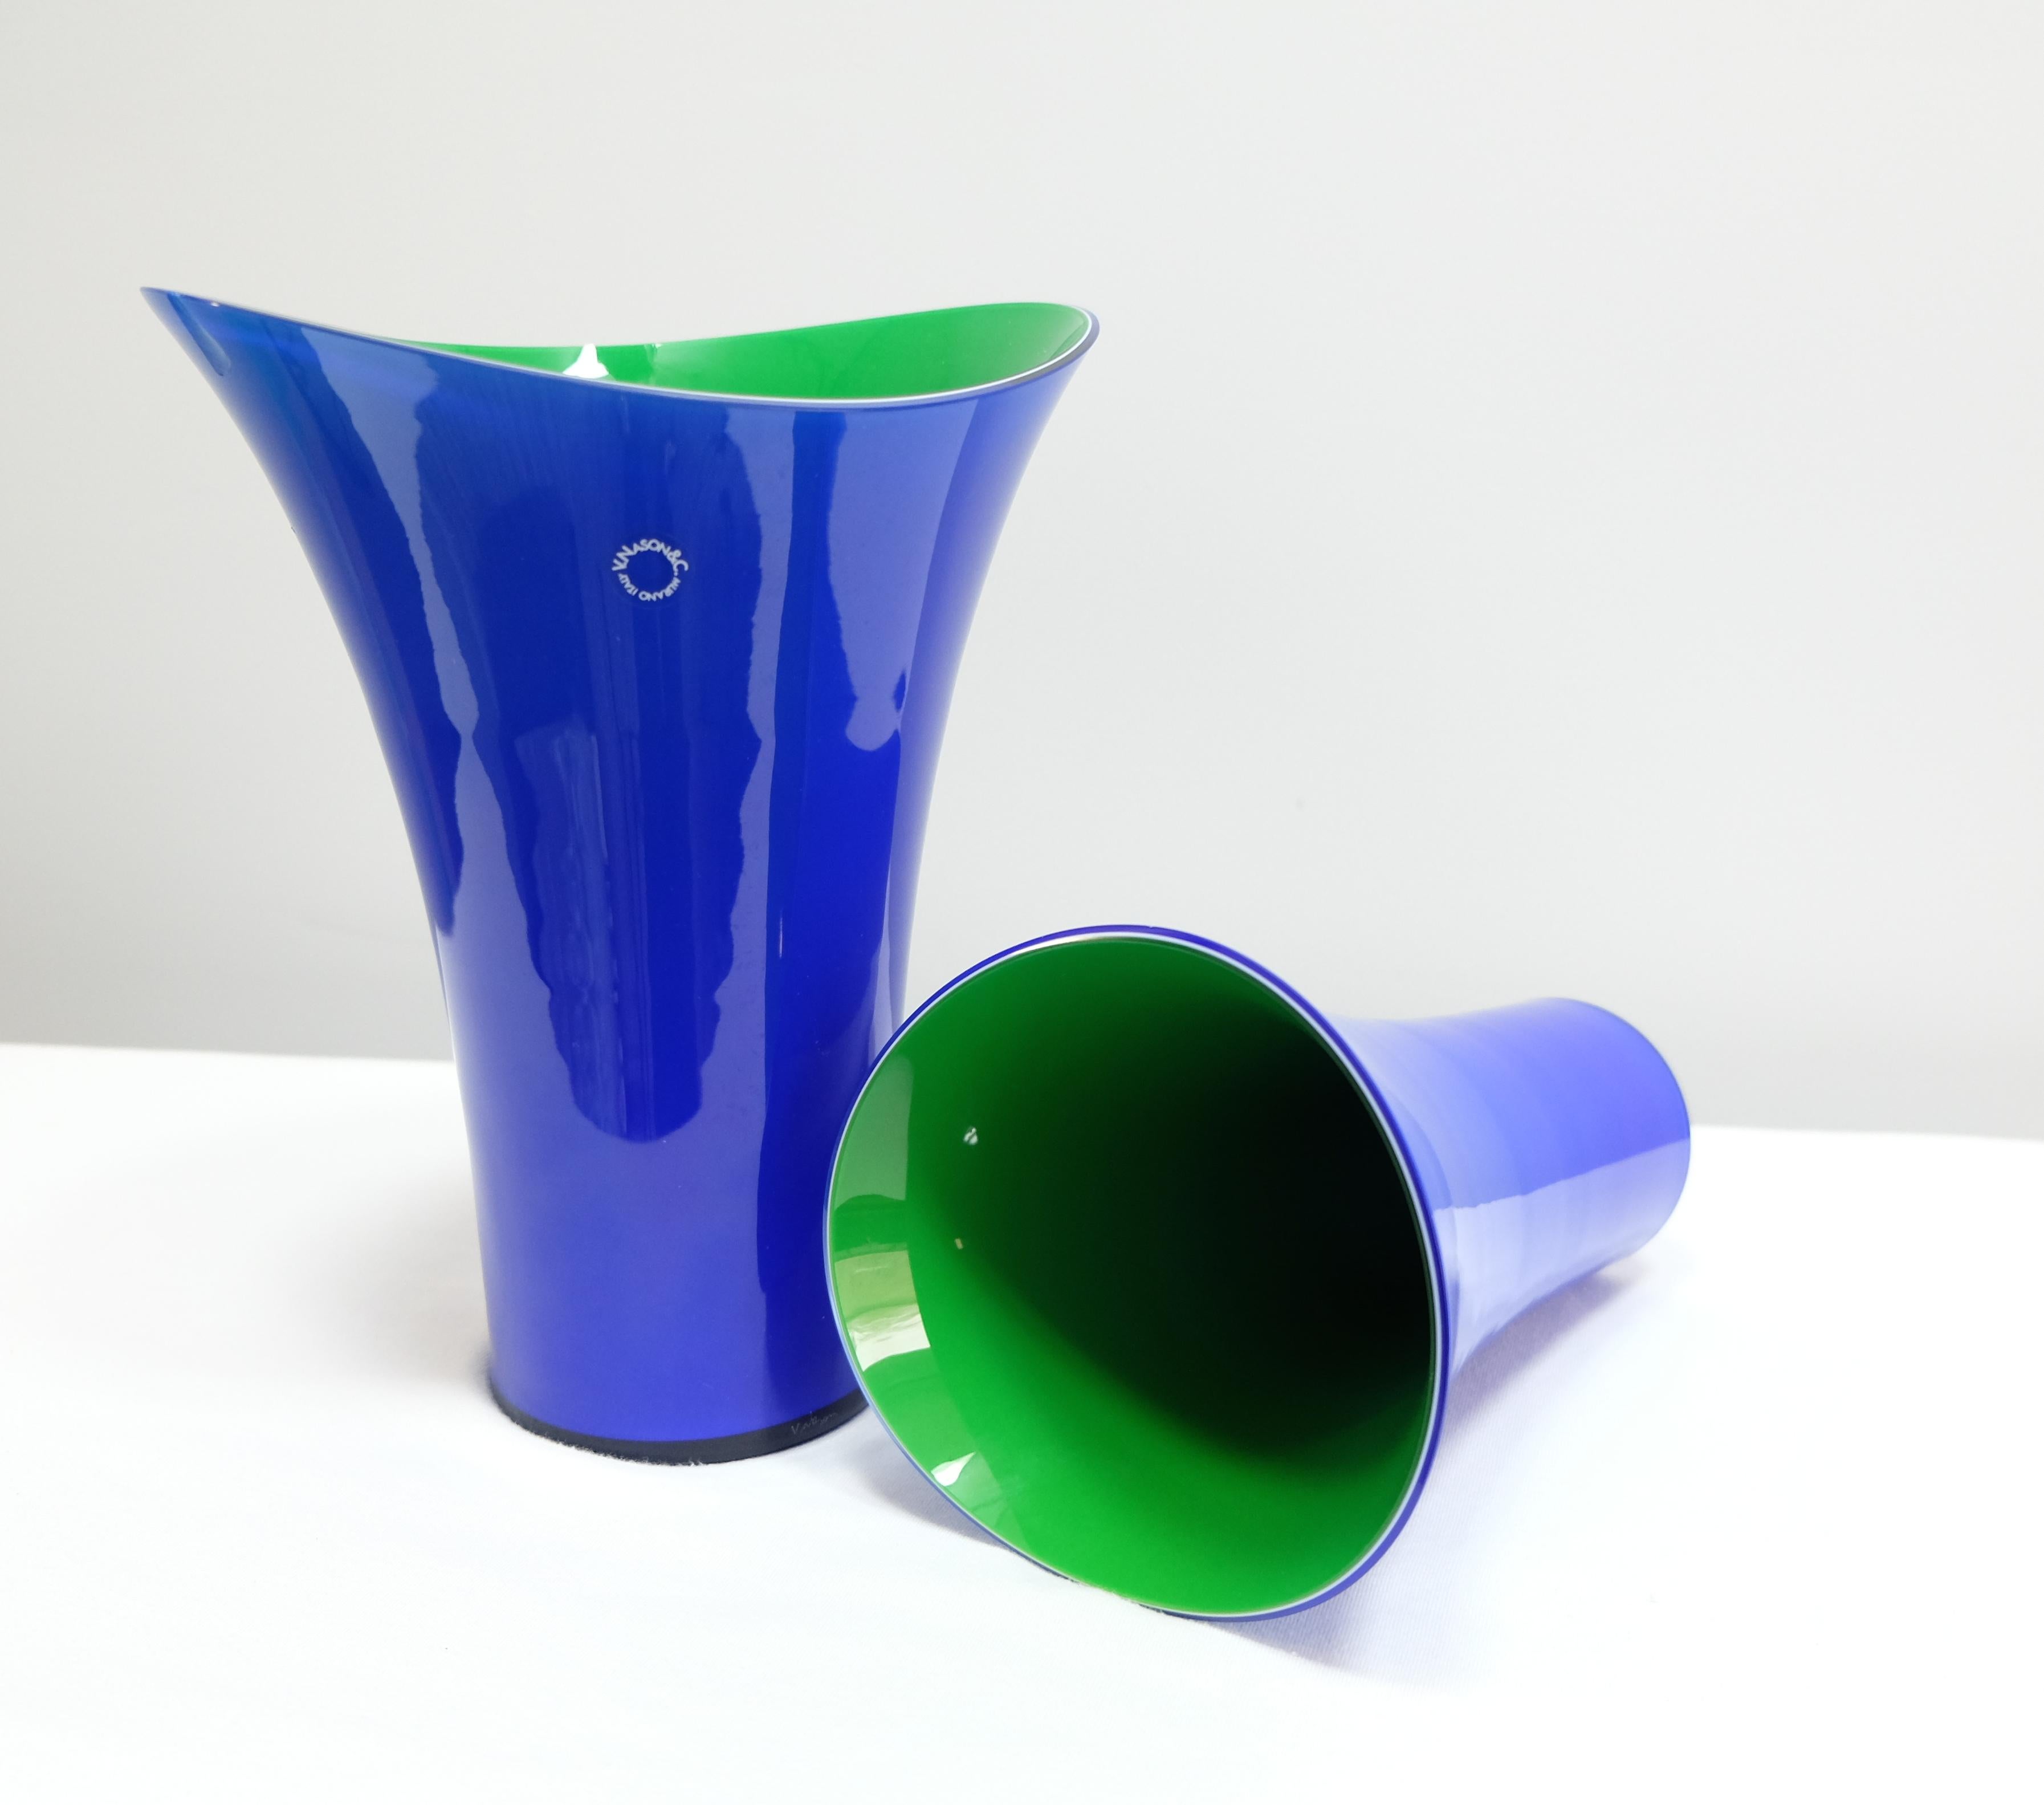 Murano Glass Vase Set by V. Nason & C. Italy, Blue and Green Asymmetric Vases For Sale 9